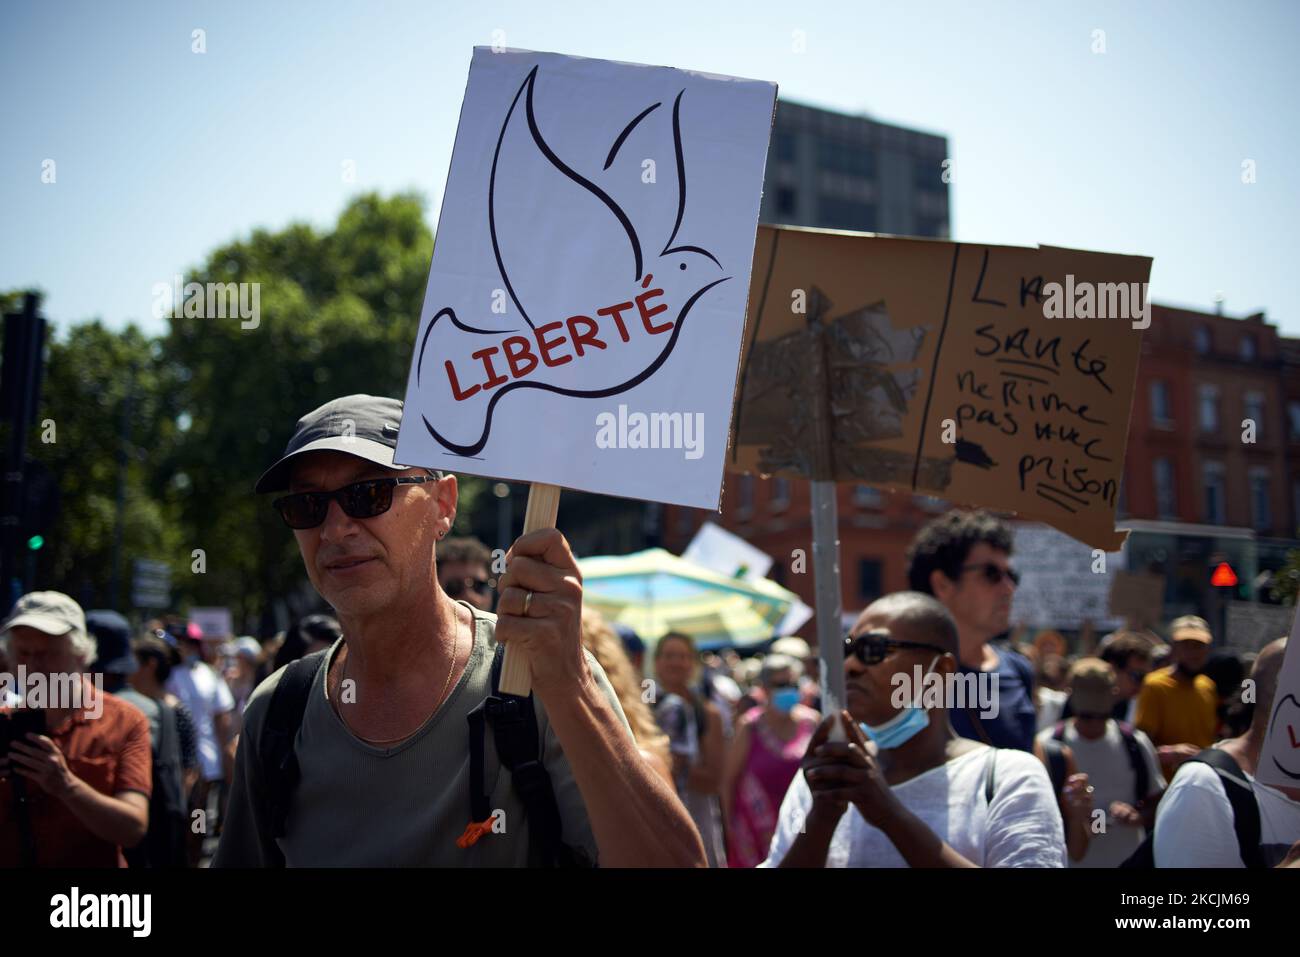 A protester holds a drawing of a dove and reading 'Liberty'. Thousands of protesters took to the streets in Toulouse against the near mandatory vaccination and against the mandatory health pass after Macron's speech on July 12th. More then 220,000 people demostrated across France. On July 12th, Macron announced the health pass will be mandatory for entry to a wide array of public venues such as cafes, theaters, concerts hall, cinemas, shopping malls, public transportation, swimming pools, and even hospitals unless a critical situation, etc. The prohibition for public spaces for unvaccinated pe Stock Photo